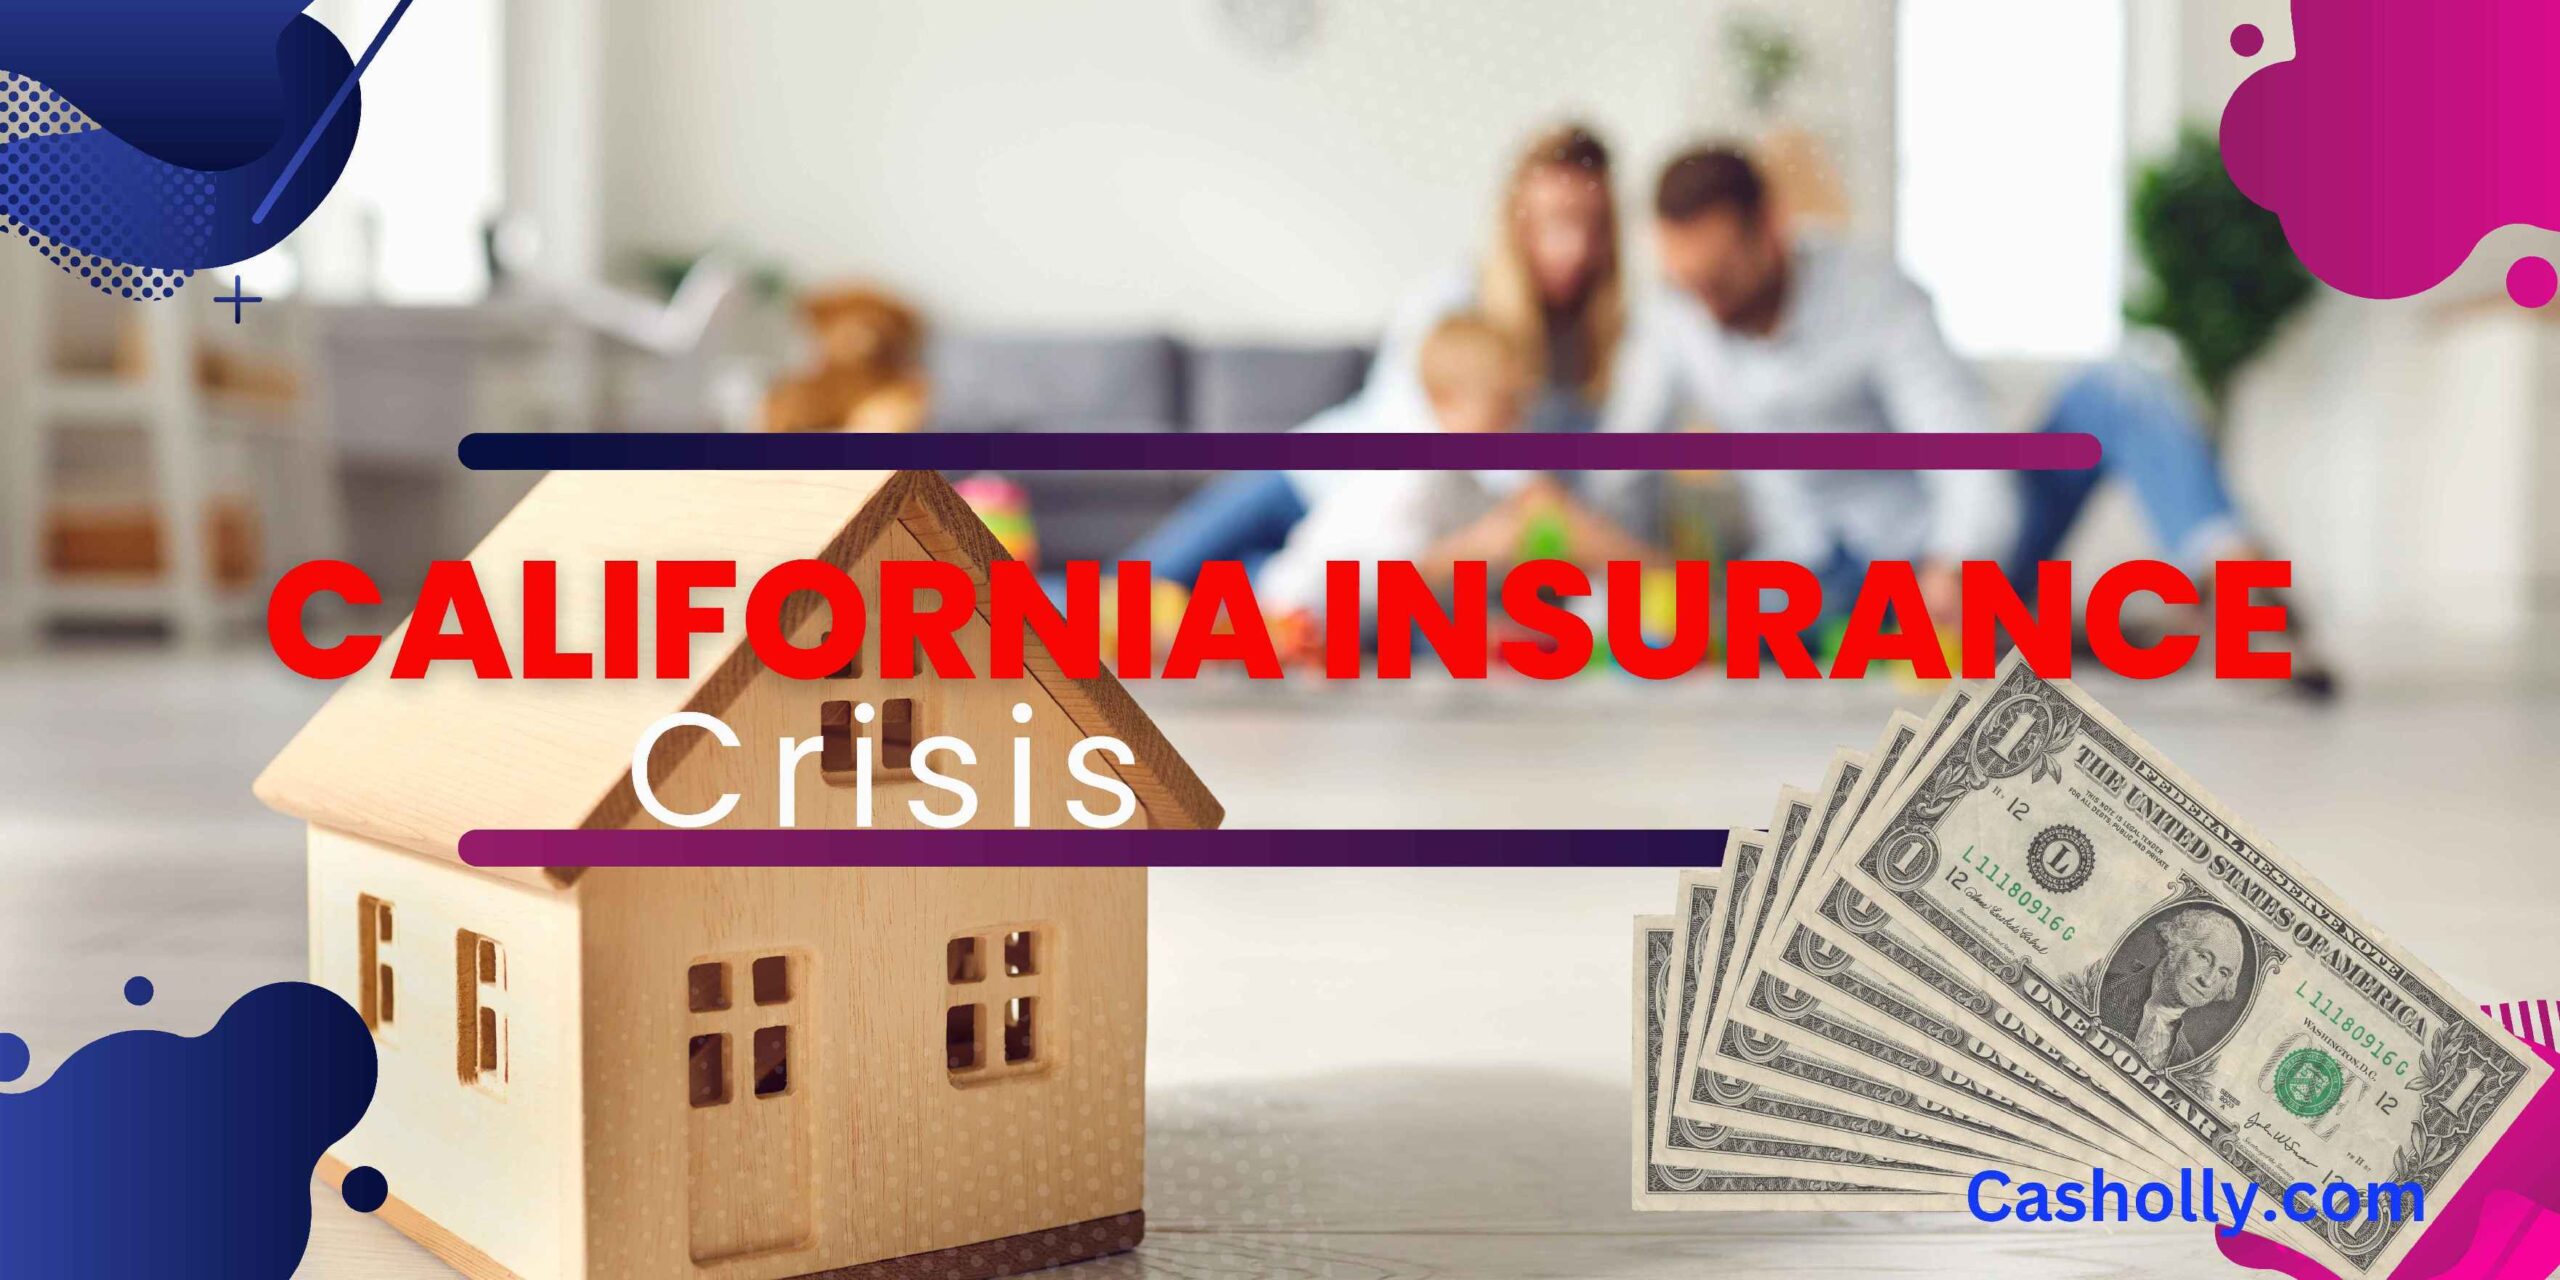 Save Money on California Insurance: Top Tips for Golden State Residents